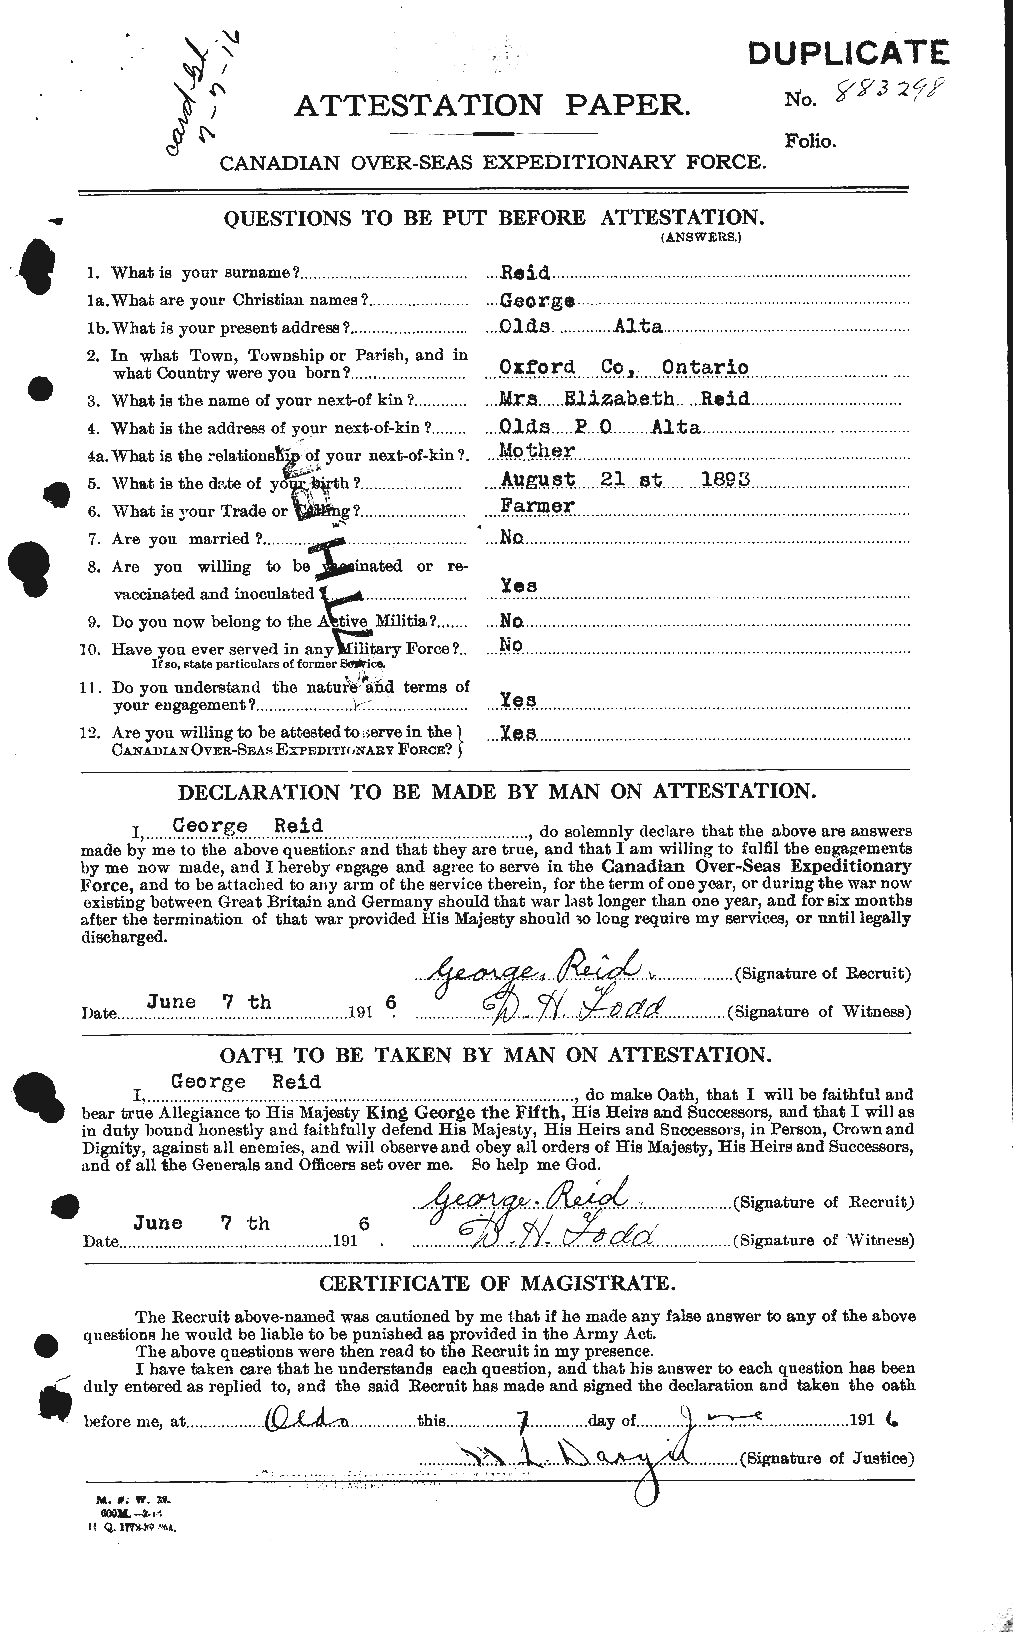 Personnel Records of the First World War - CEF 596277a